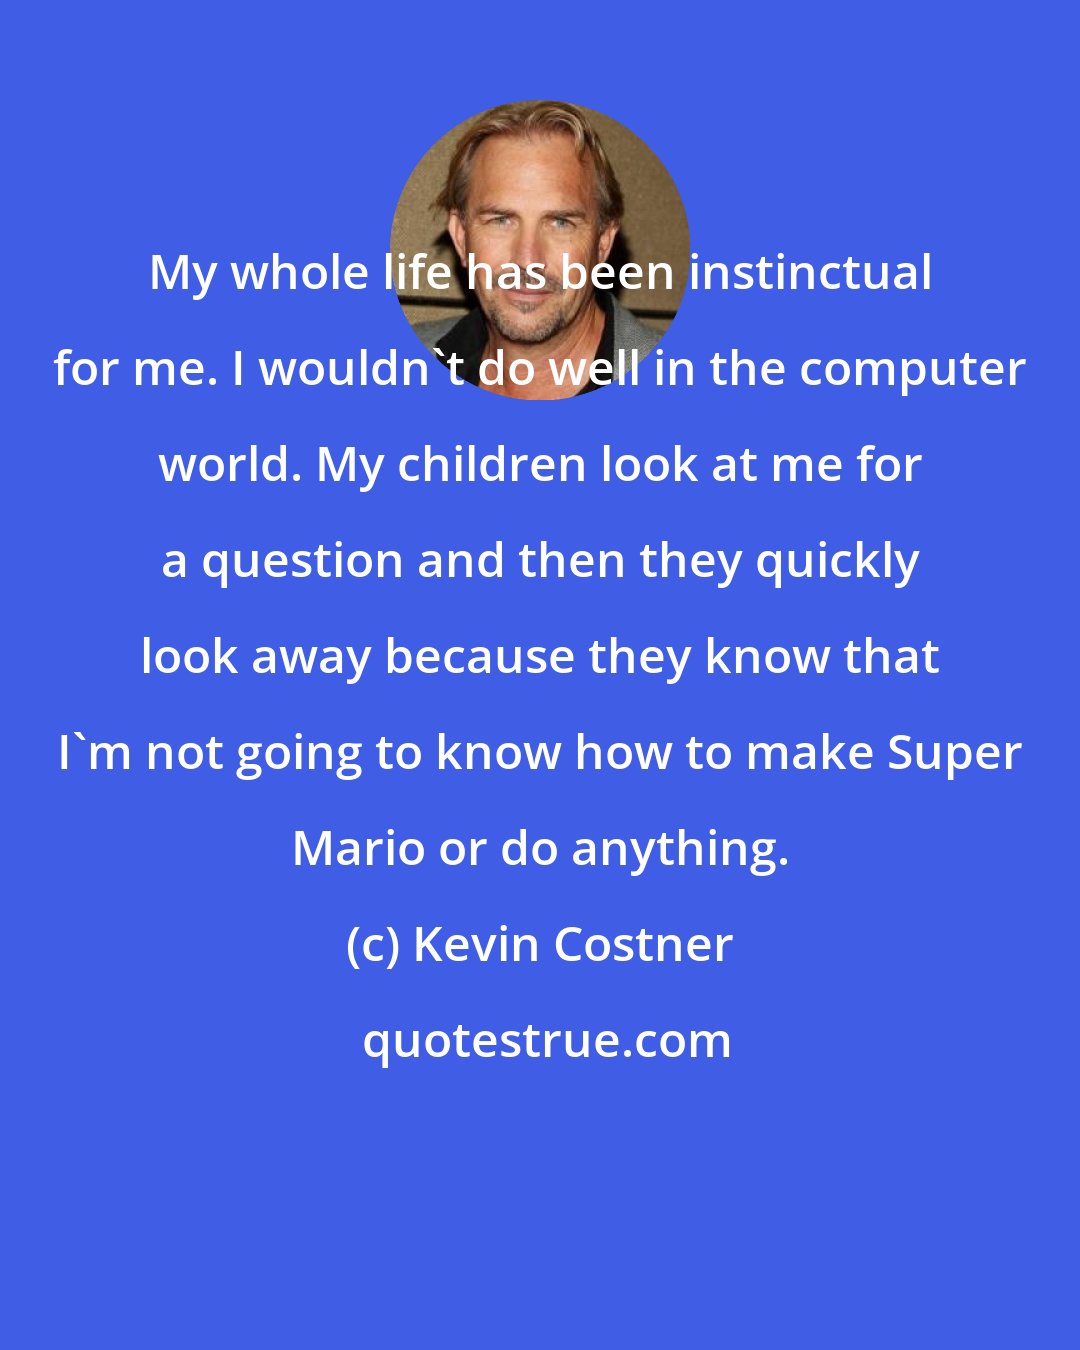 Kevin Costner: My whole life has been instinctual for me. I wouldn't do well in the computer world. My children look at me for a question and then they quickly look away because they know that I'm not going to know how to make Super Mario or do anything.